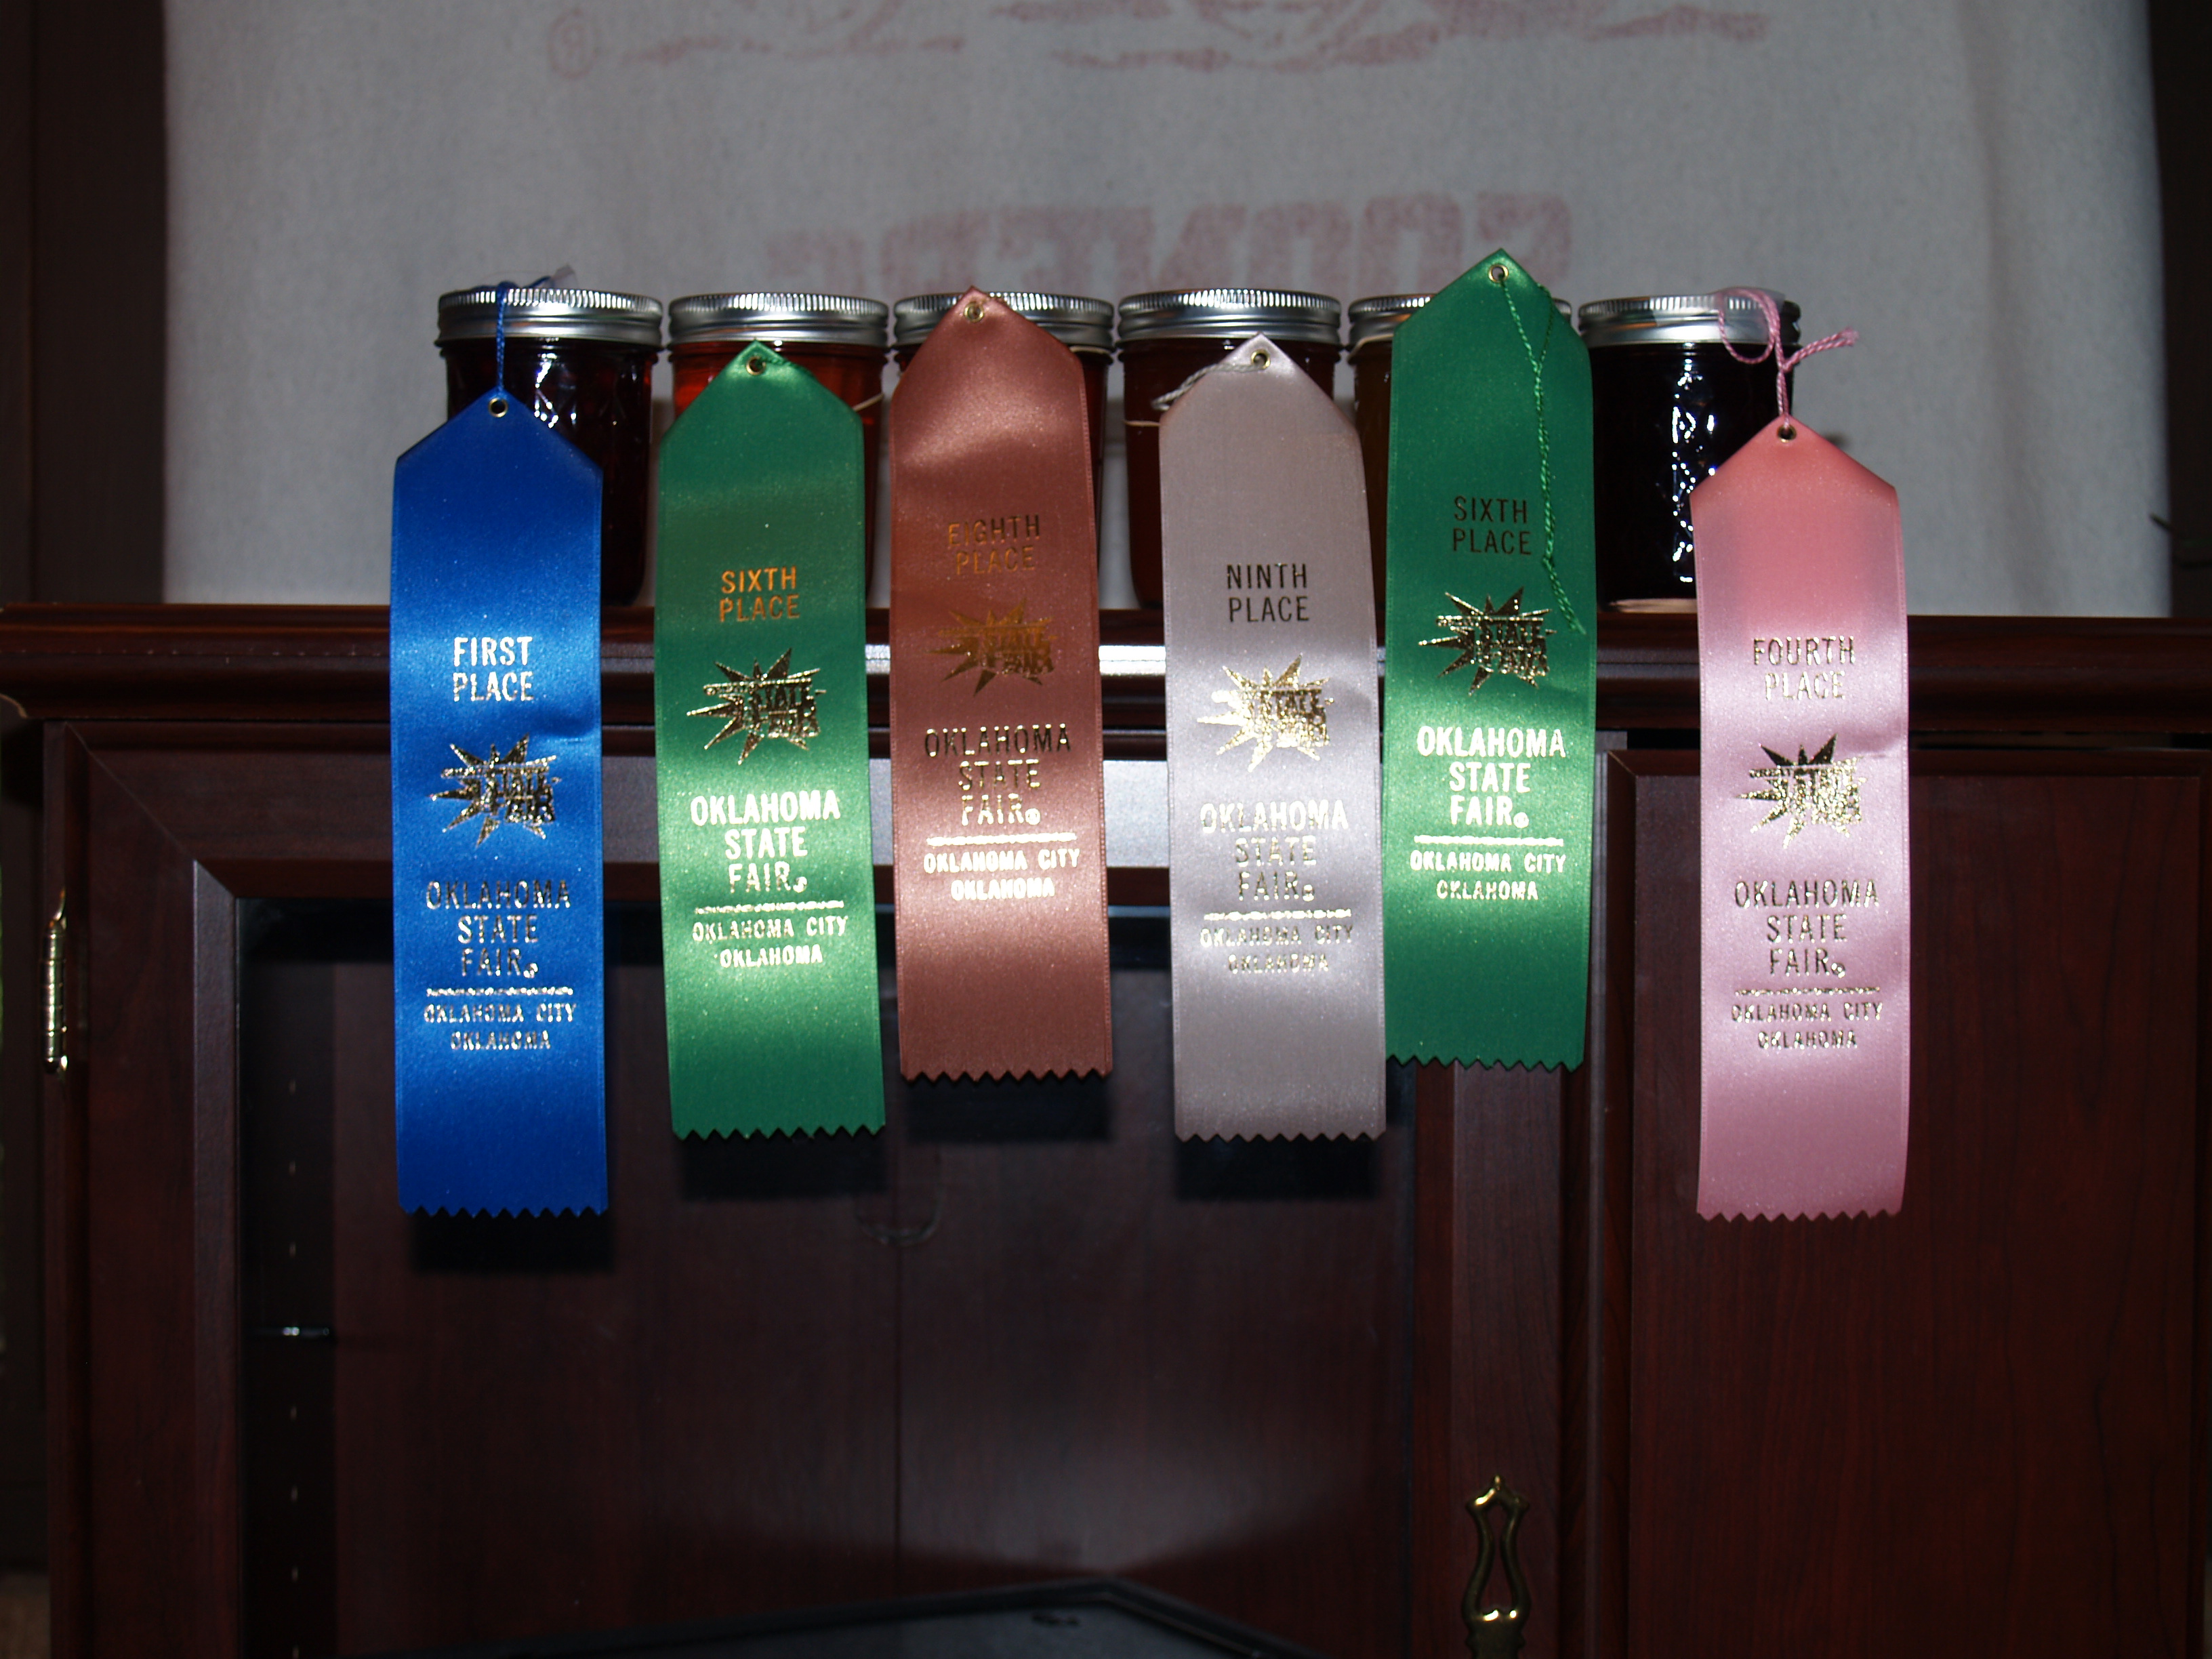 I entered twelve jars of different kinds of jelly/jam and I came home with eleven ribbons, one of them a blue first place ribbon!